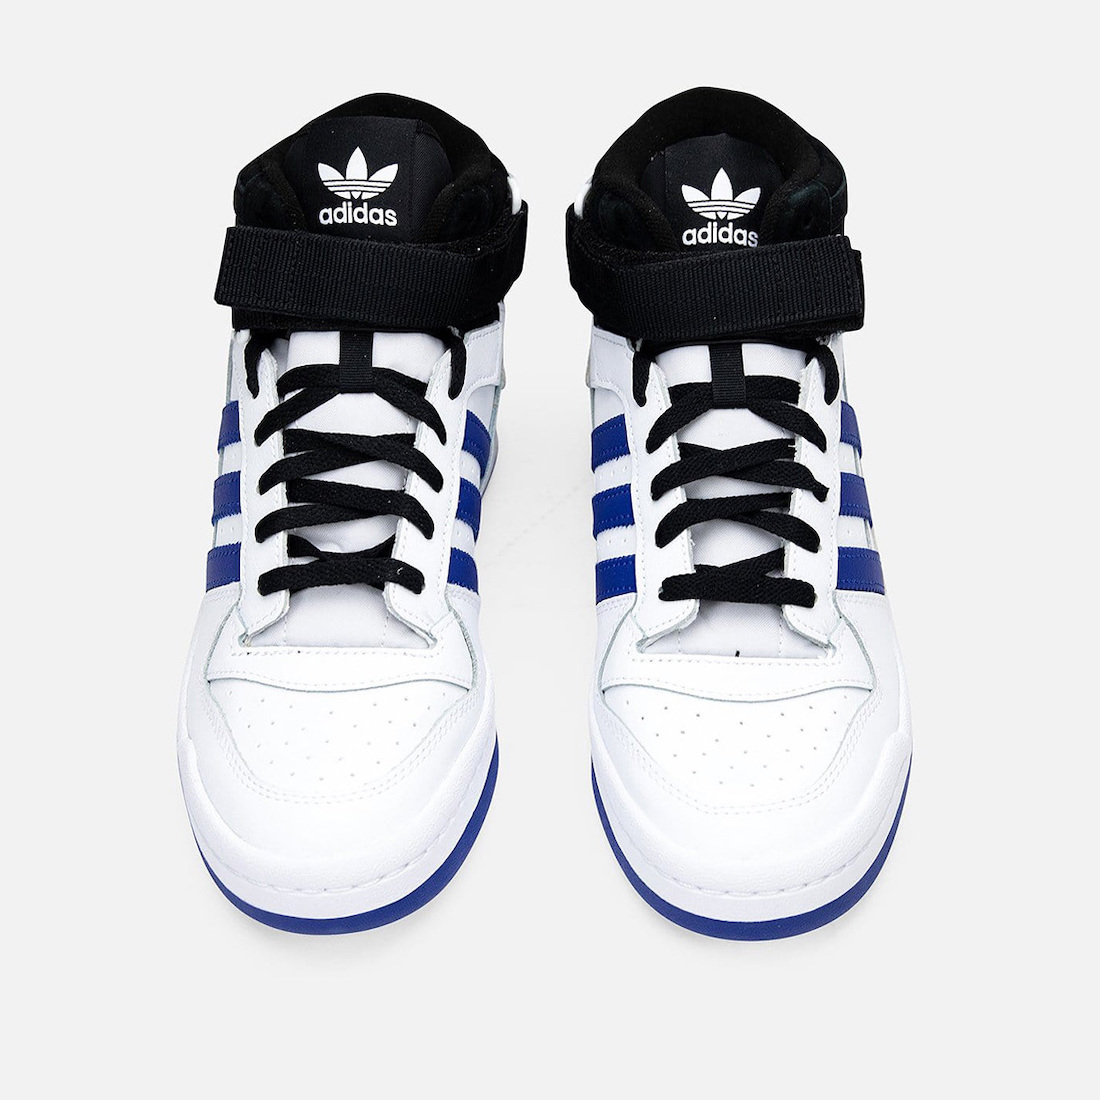 adidas Forum Mid Royal Blue FY6796 Release Date